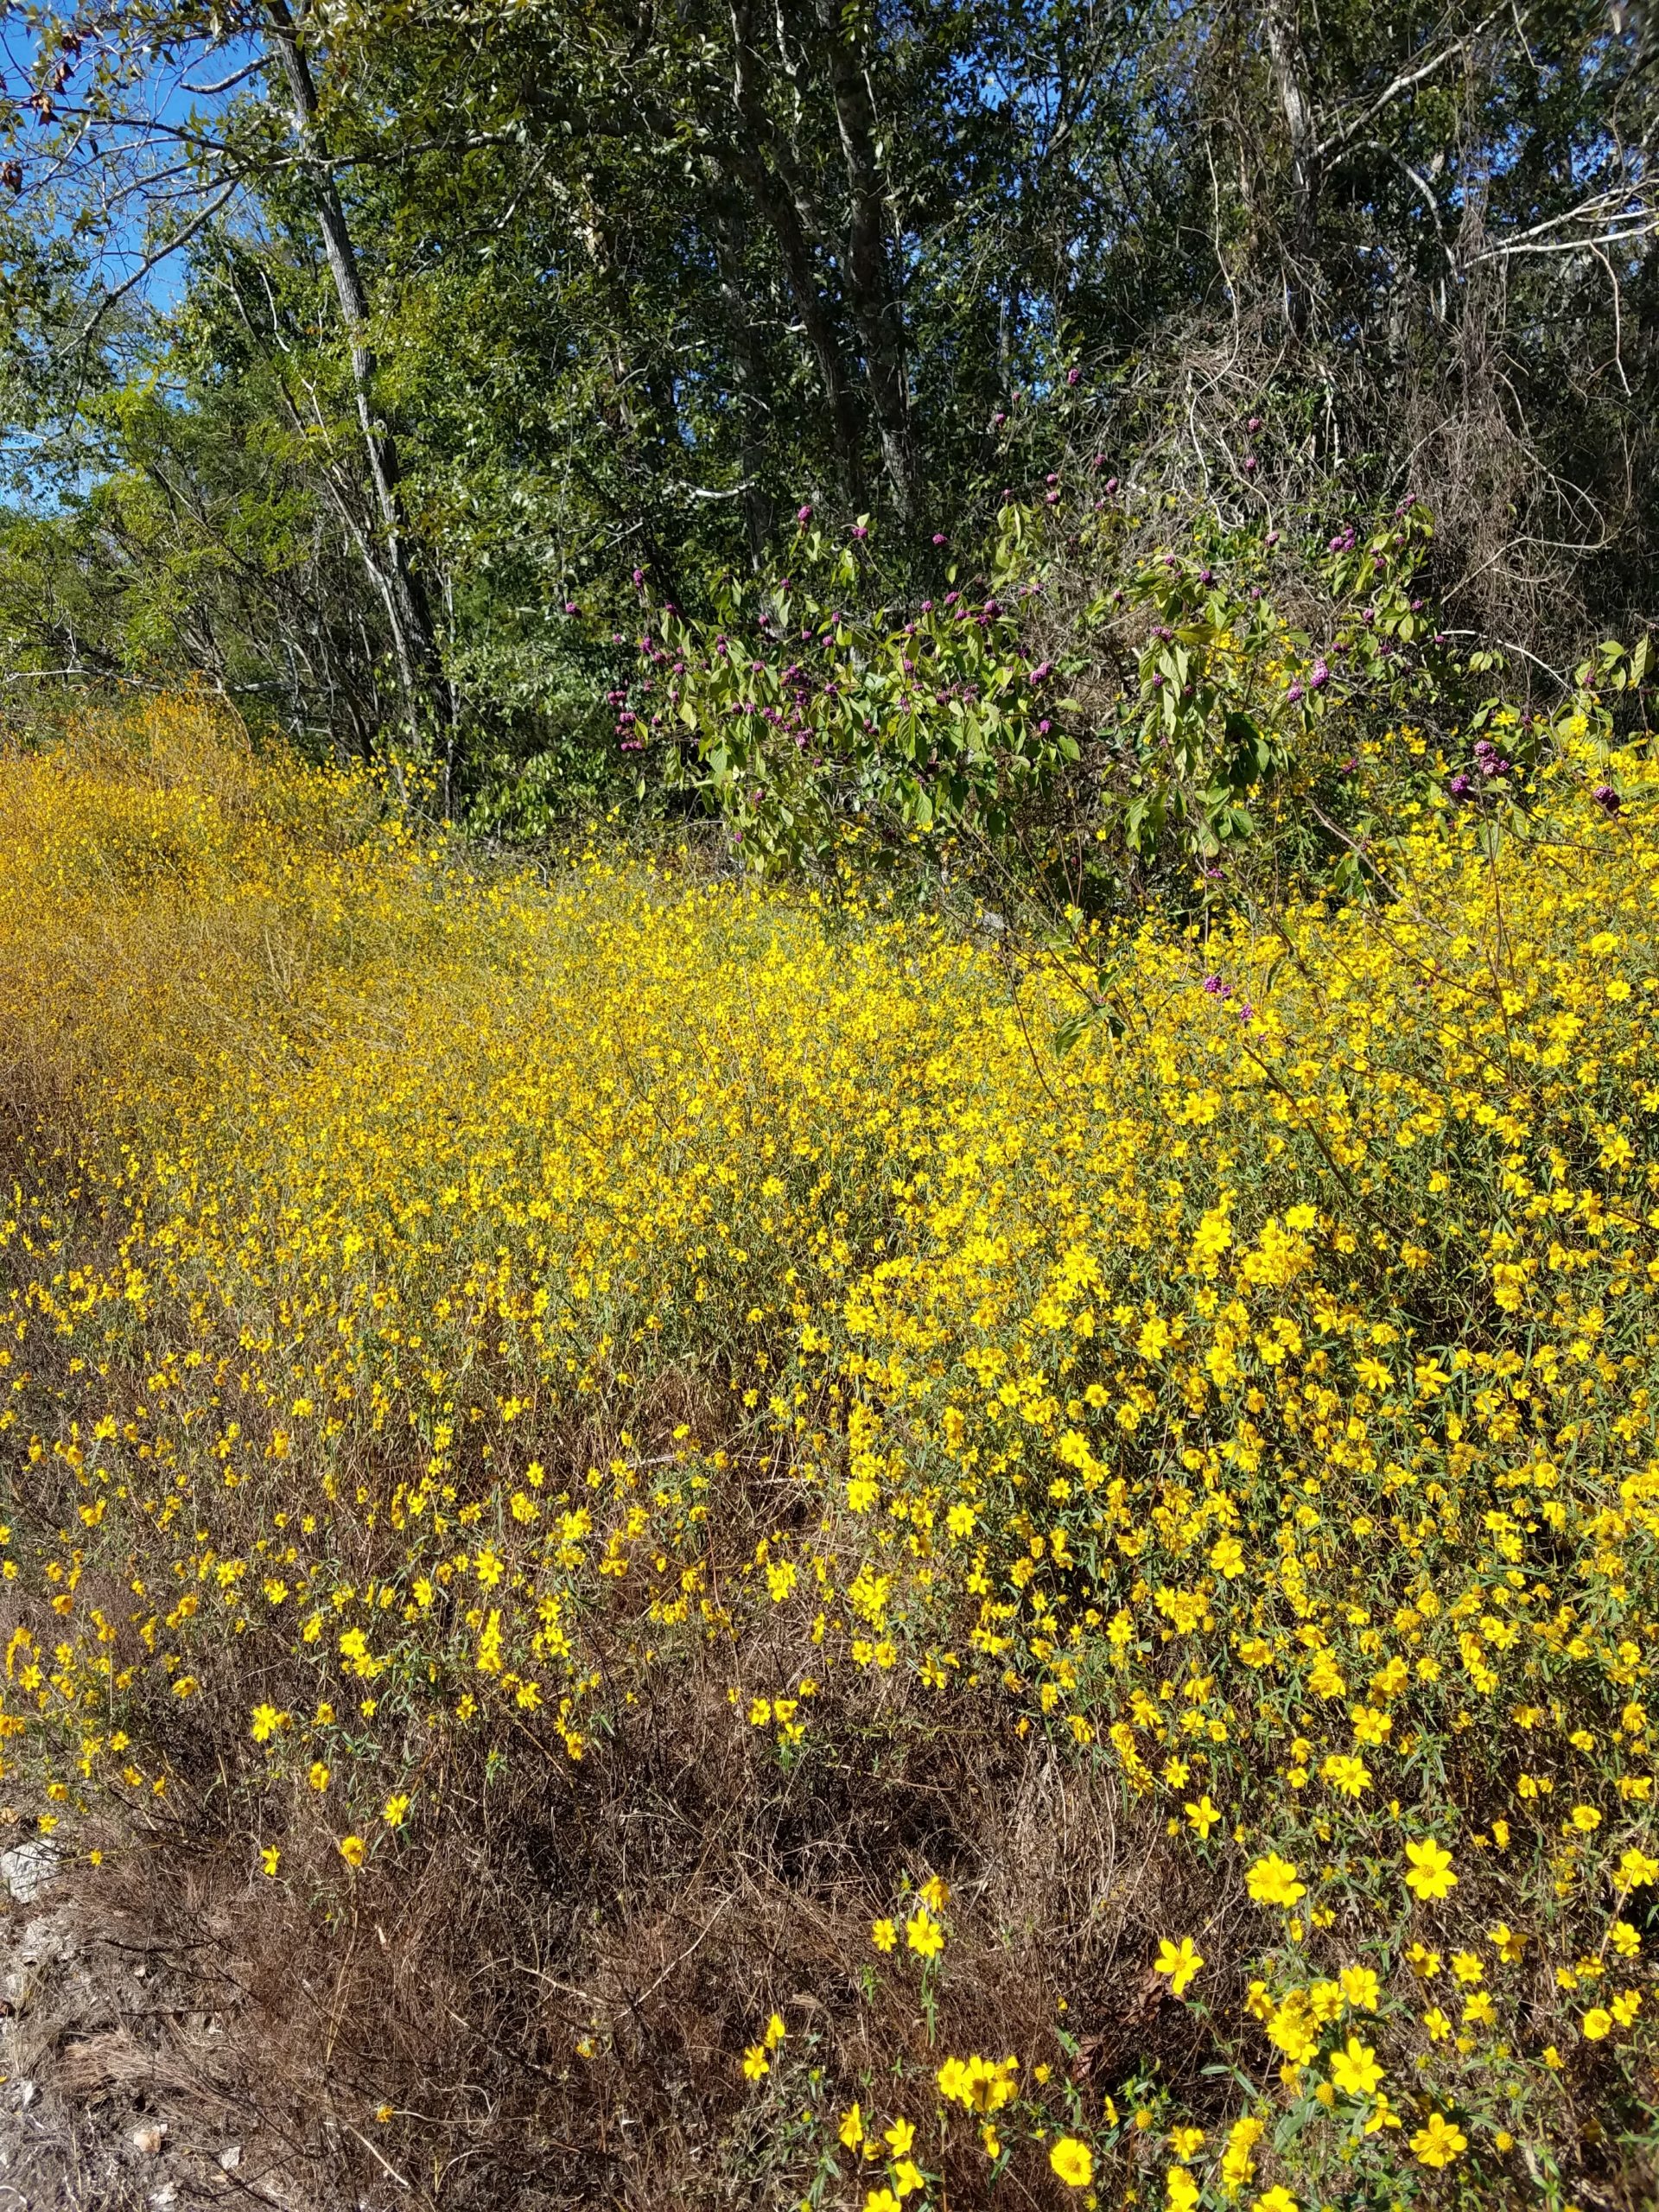 field of yellow flowers on the sunny edge of a forest